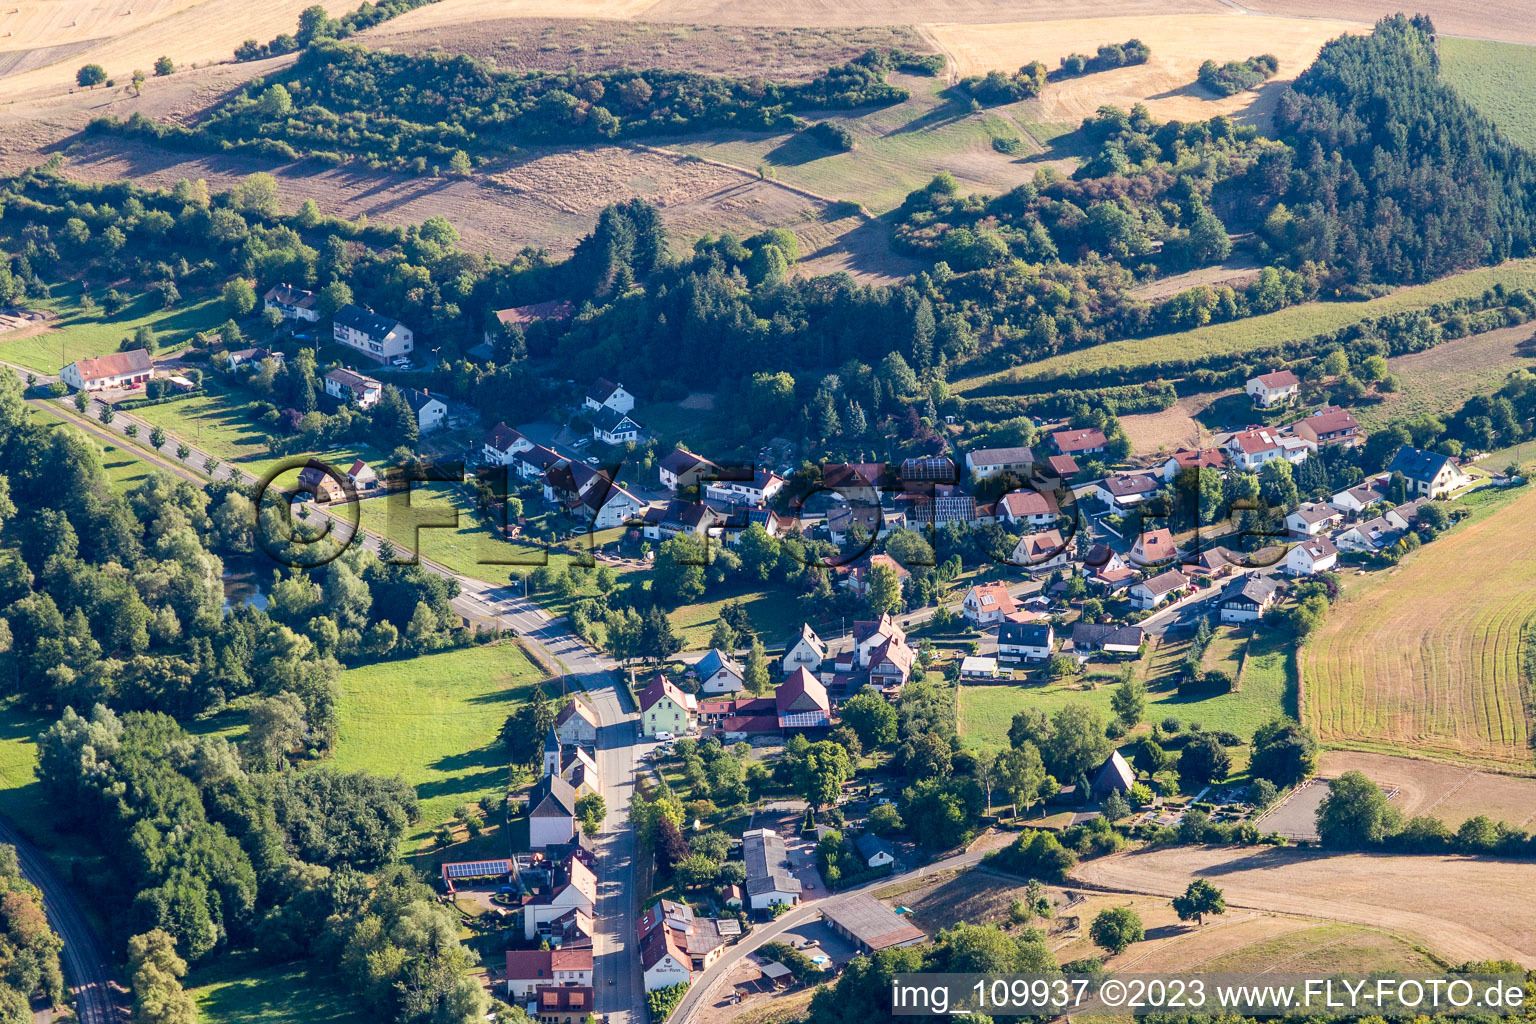 Drone image of Mannweiler-Cölln in the state Rhineland-Palatinate, Germany